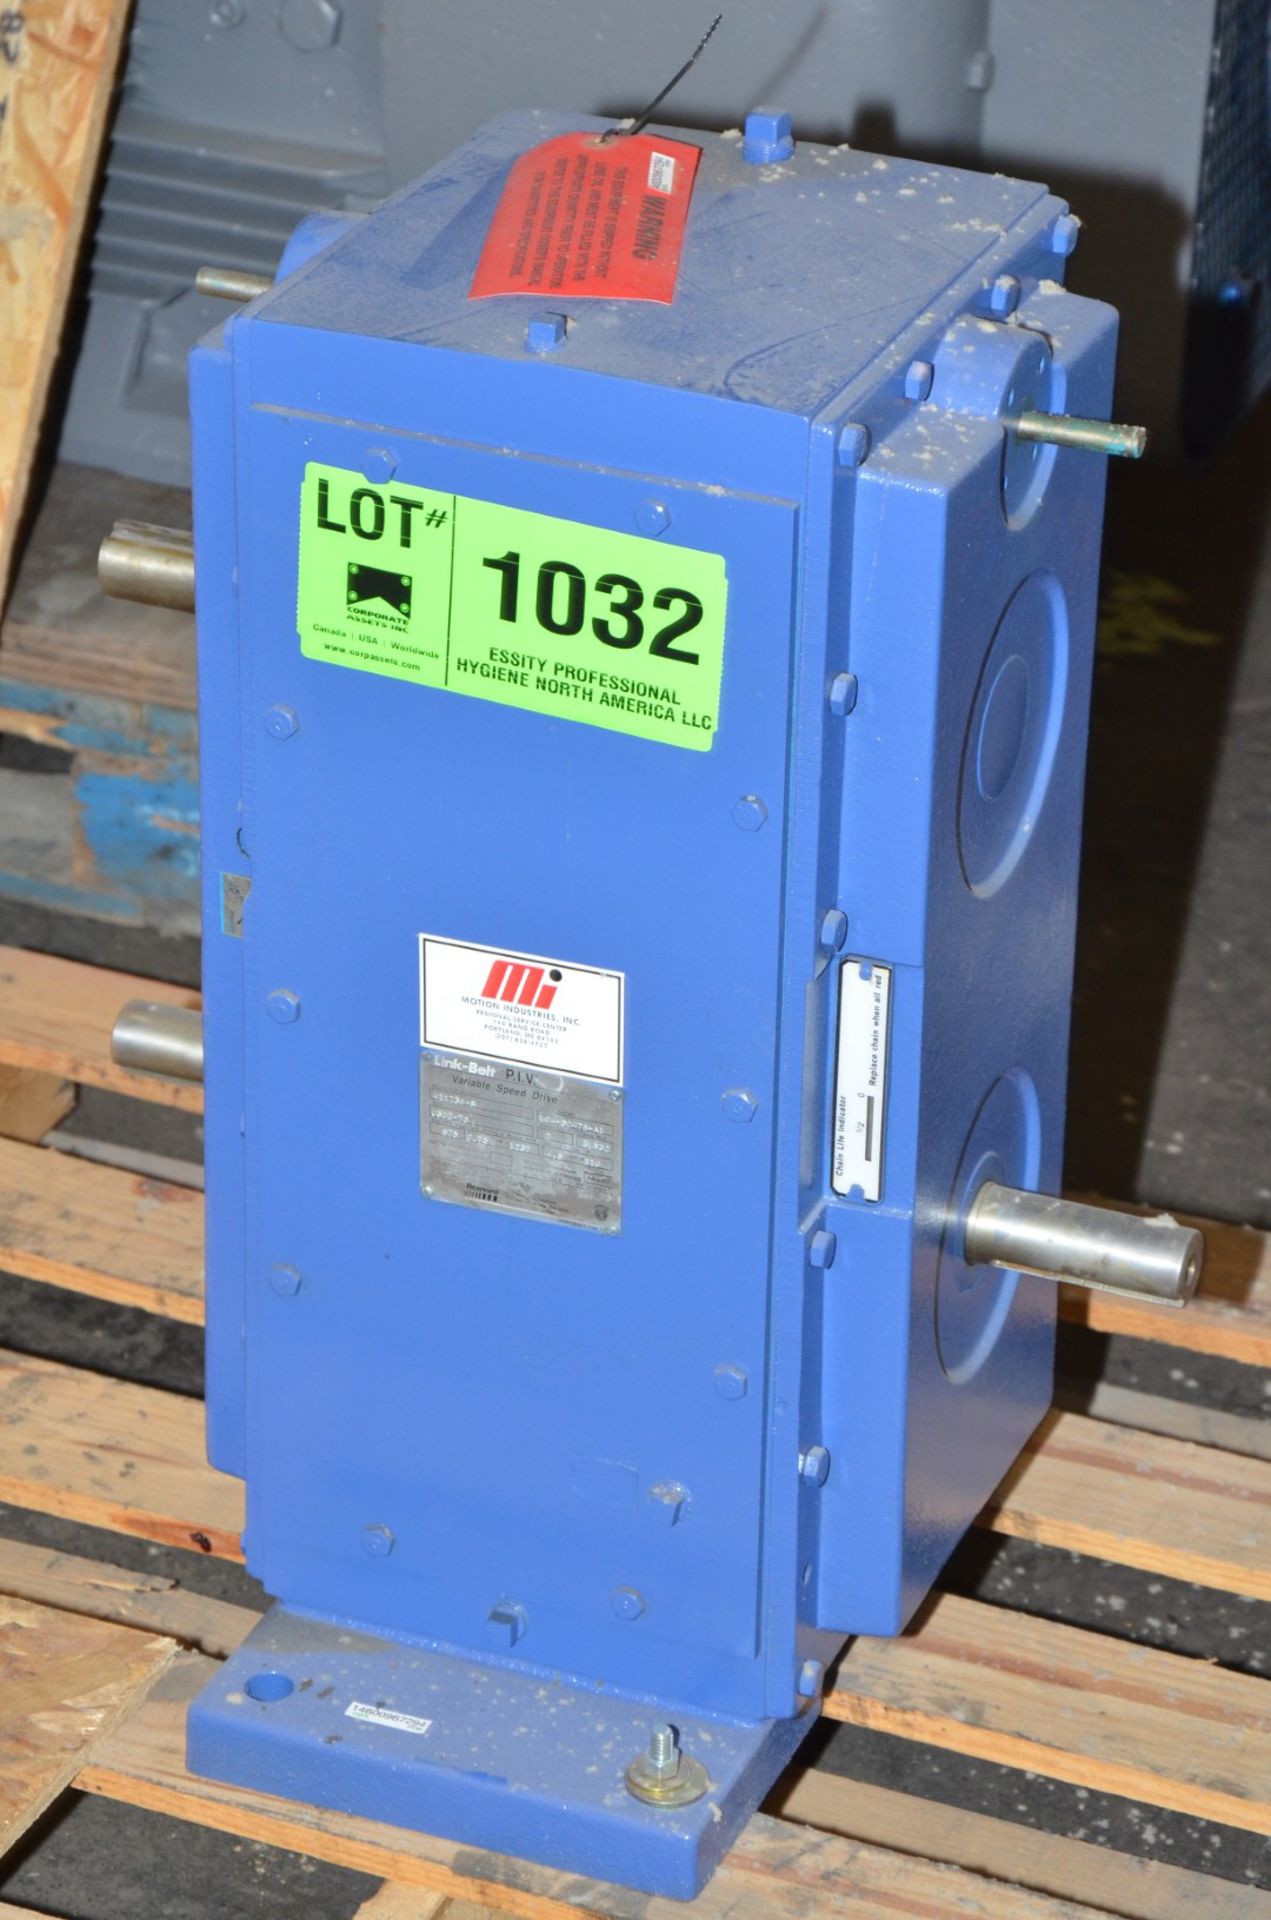 LINK-BELT 411Z390-S REXNORD VARIABLE SPEED DRIVE, 6.75 HP @ 1237 RATING, S/N L04-50478-A1 [RIGGING